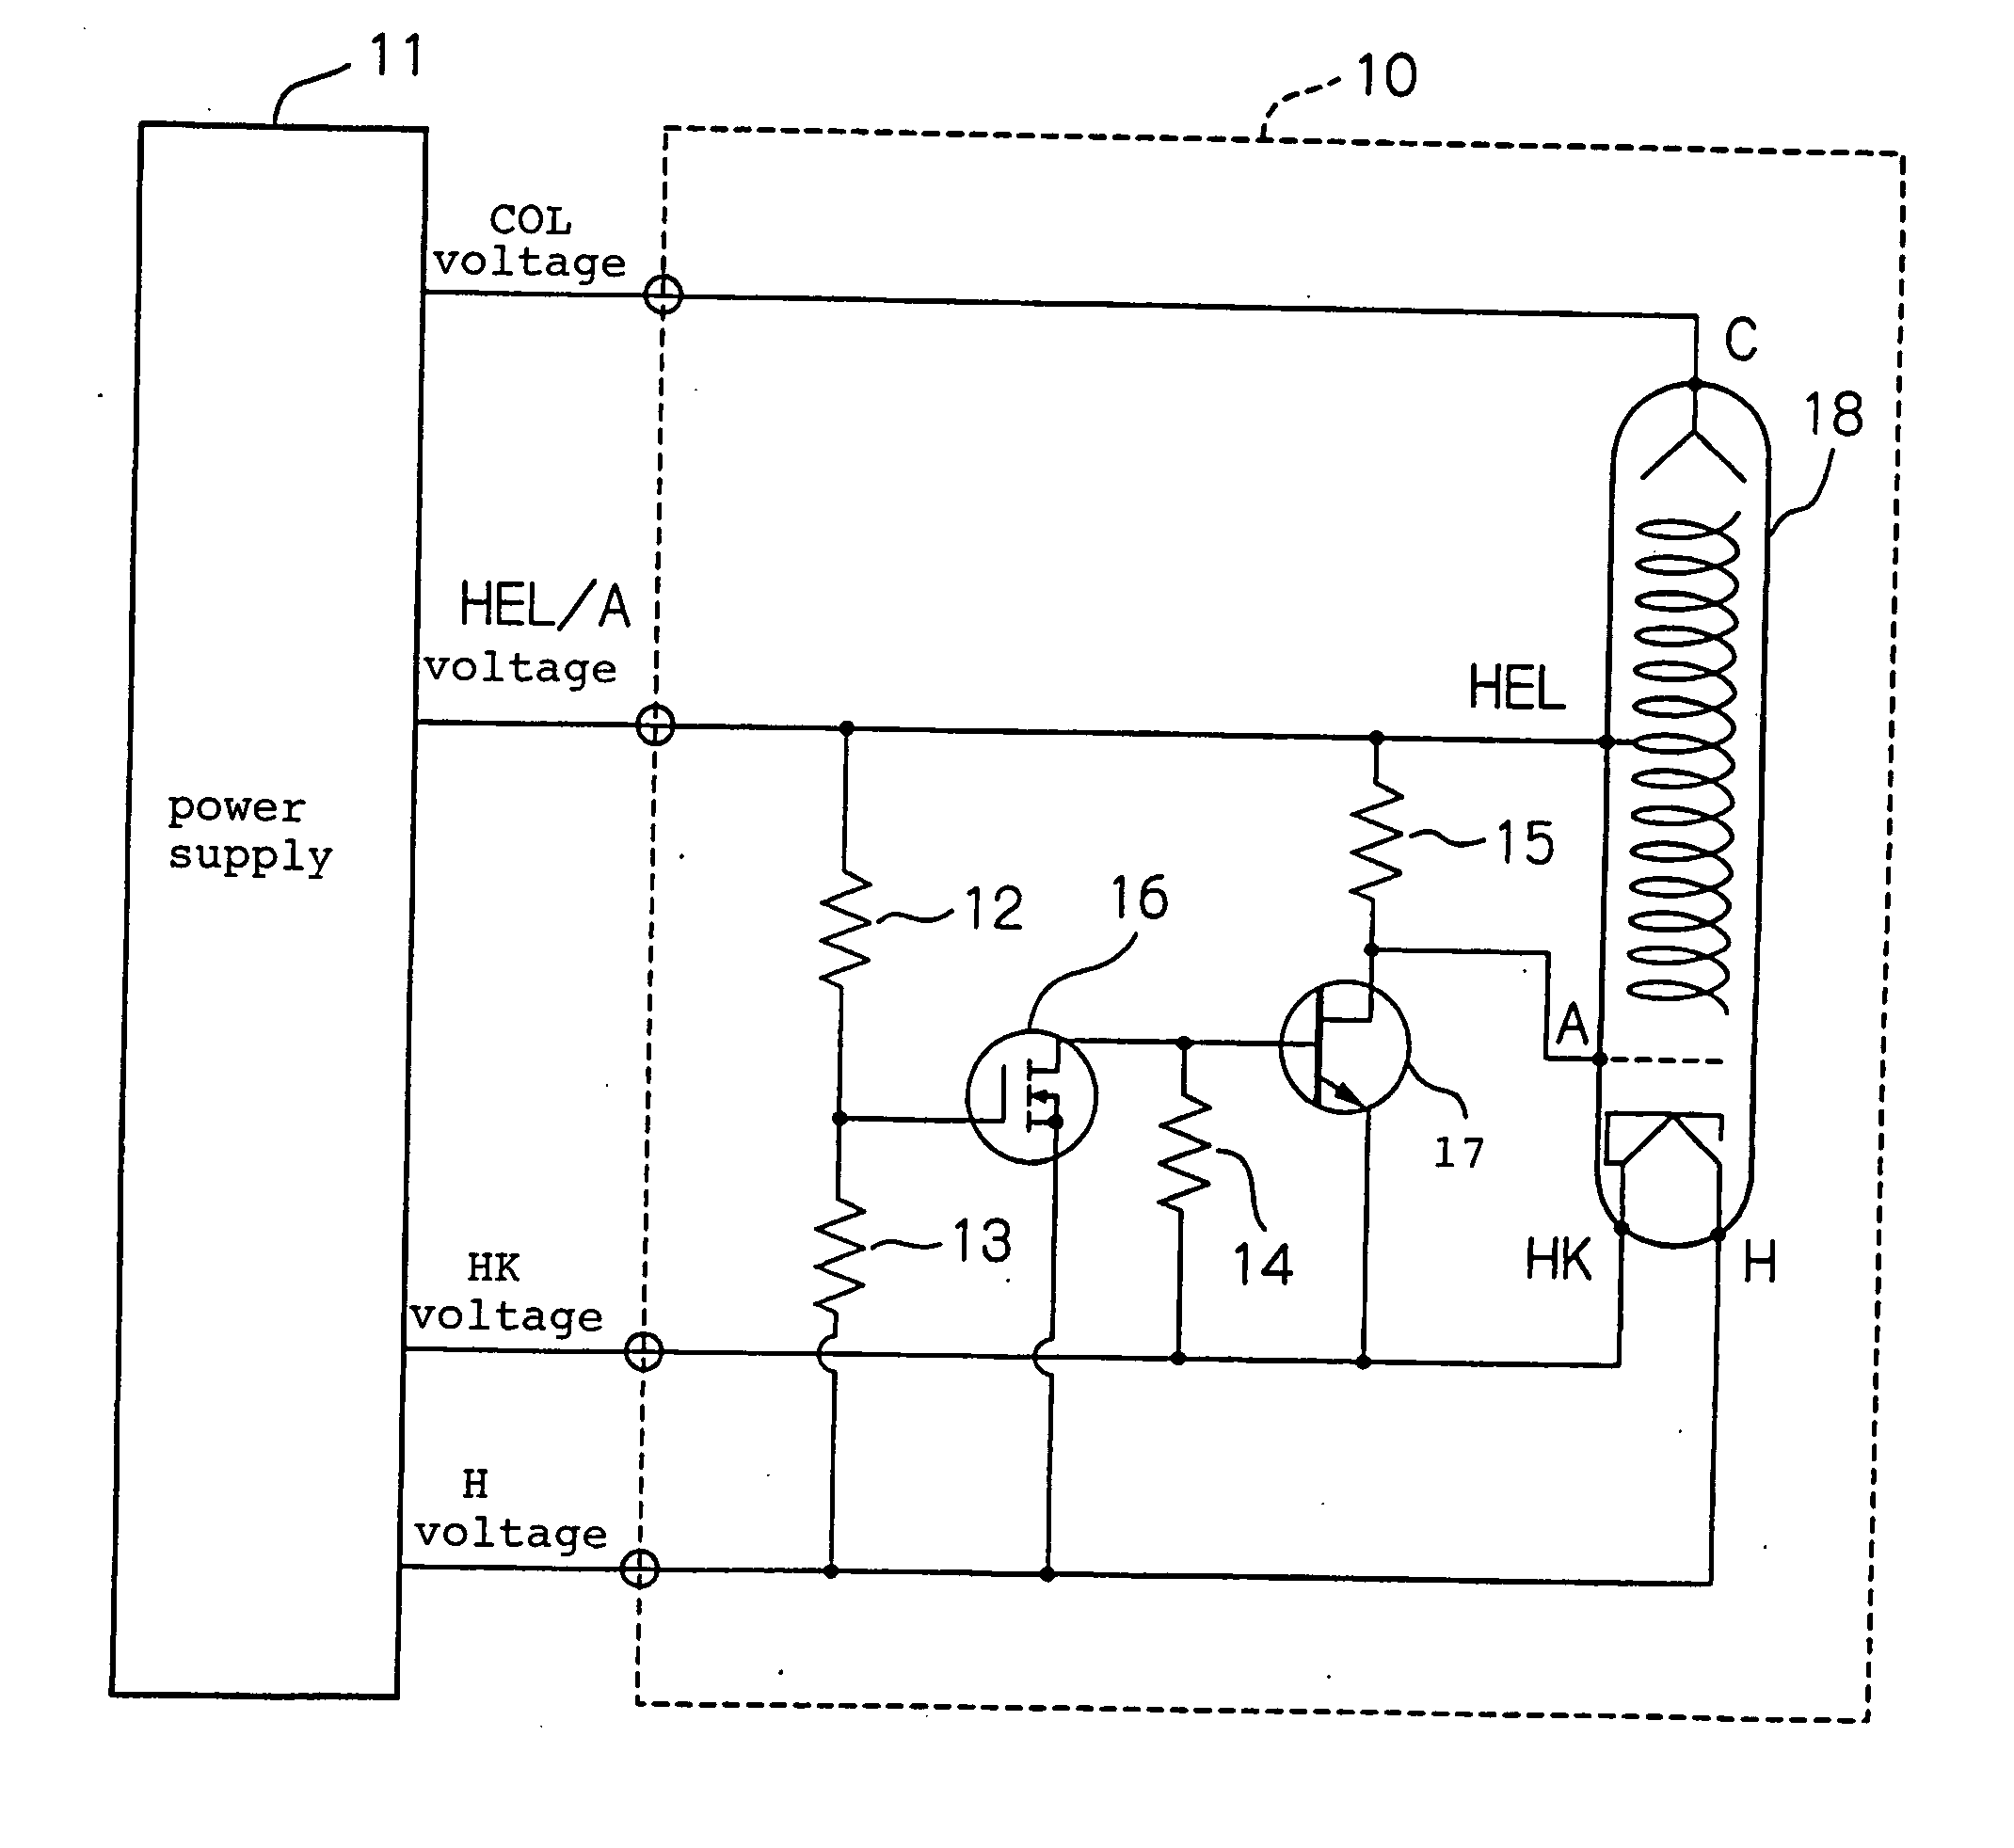 Power supply circuit for traveling-wave tube which eliminates large relay and relay driving power supply